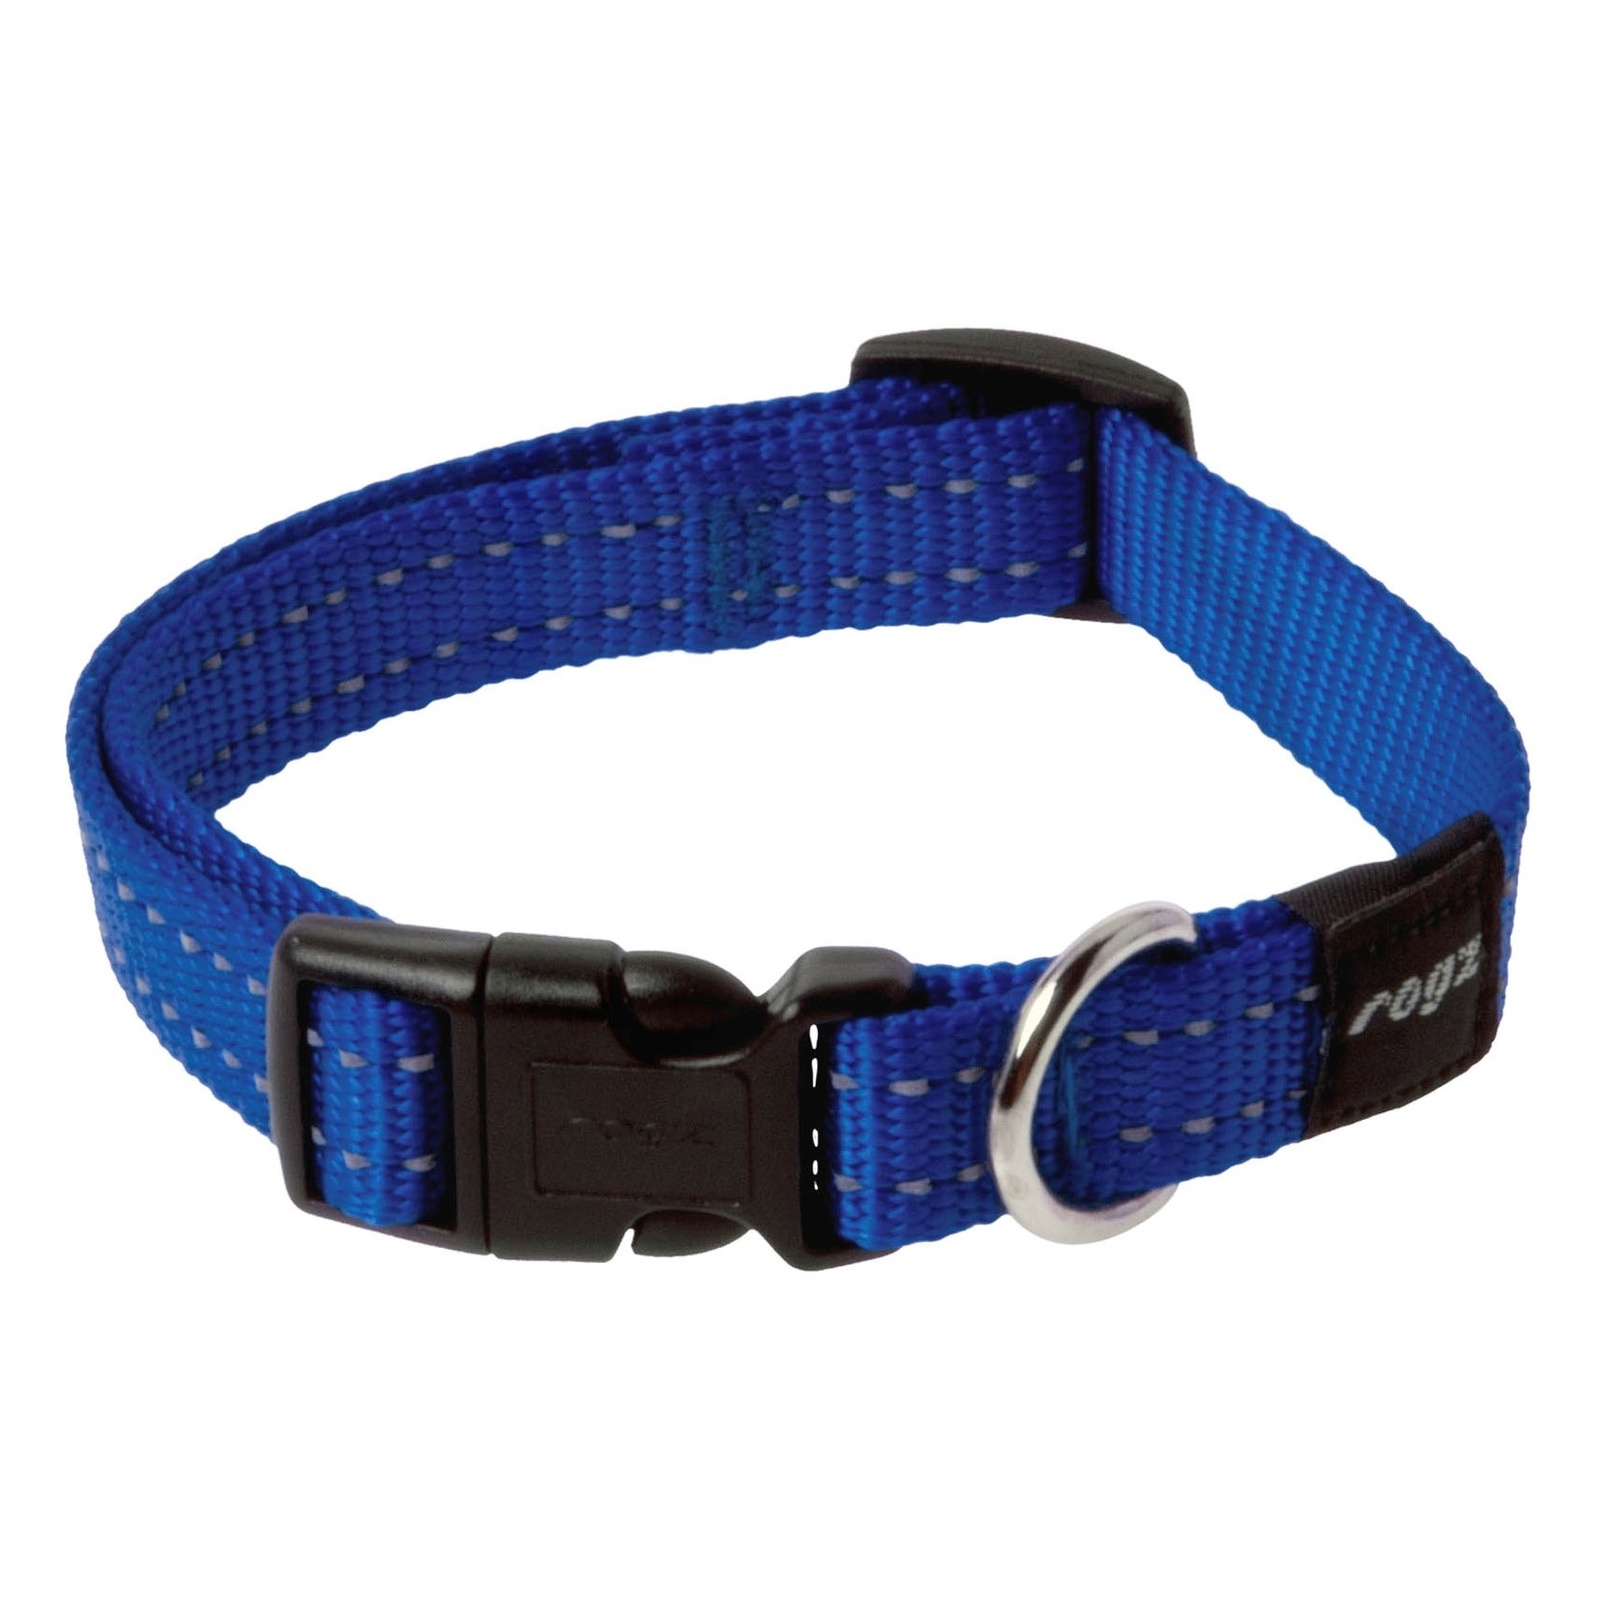 Rogz Utility Side-Release Collar with Reflective Stitching - Blue image 0